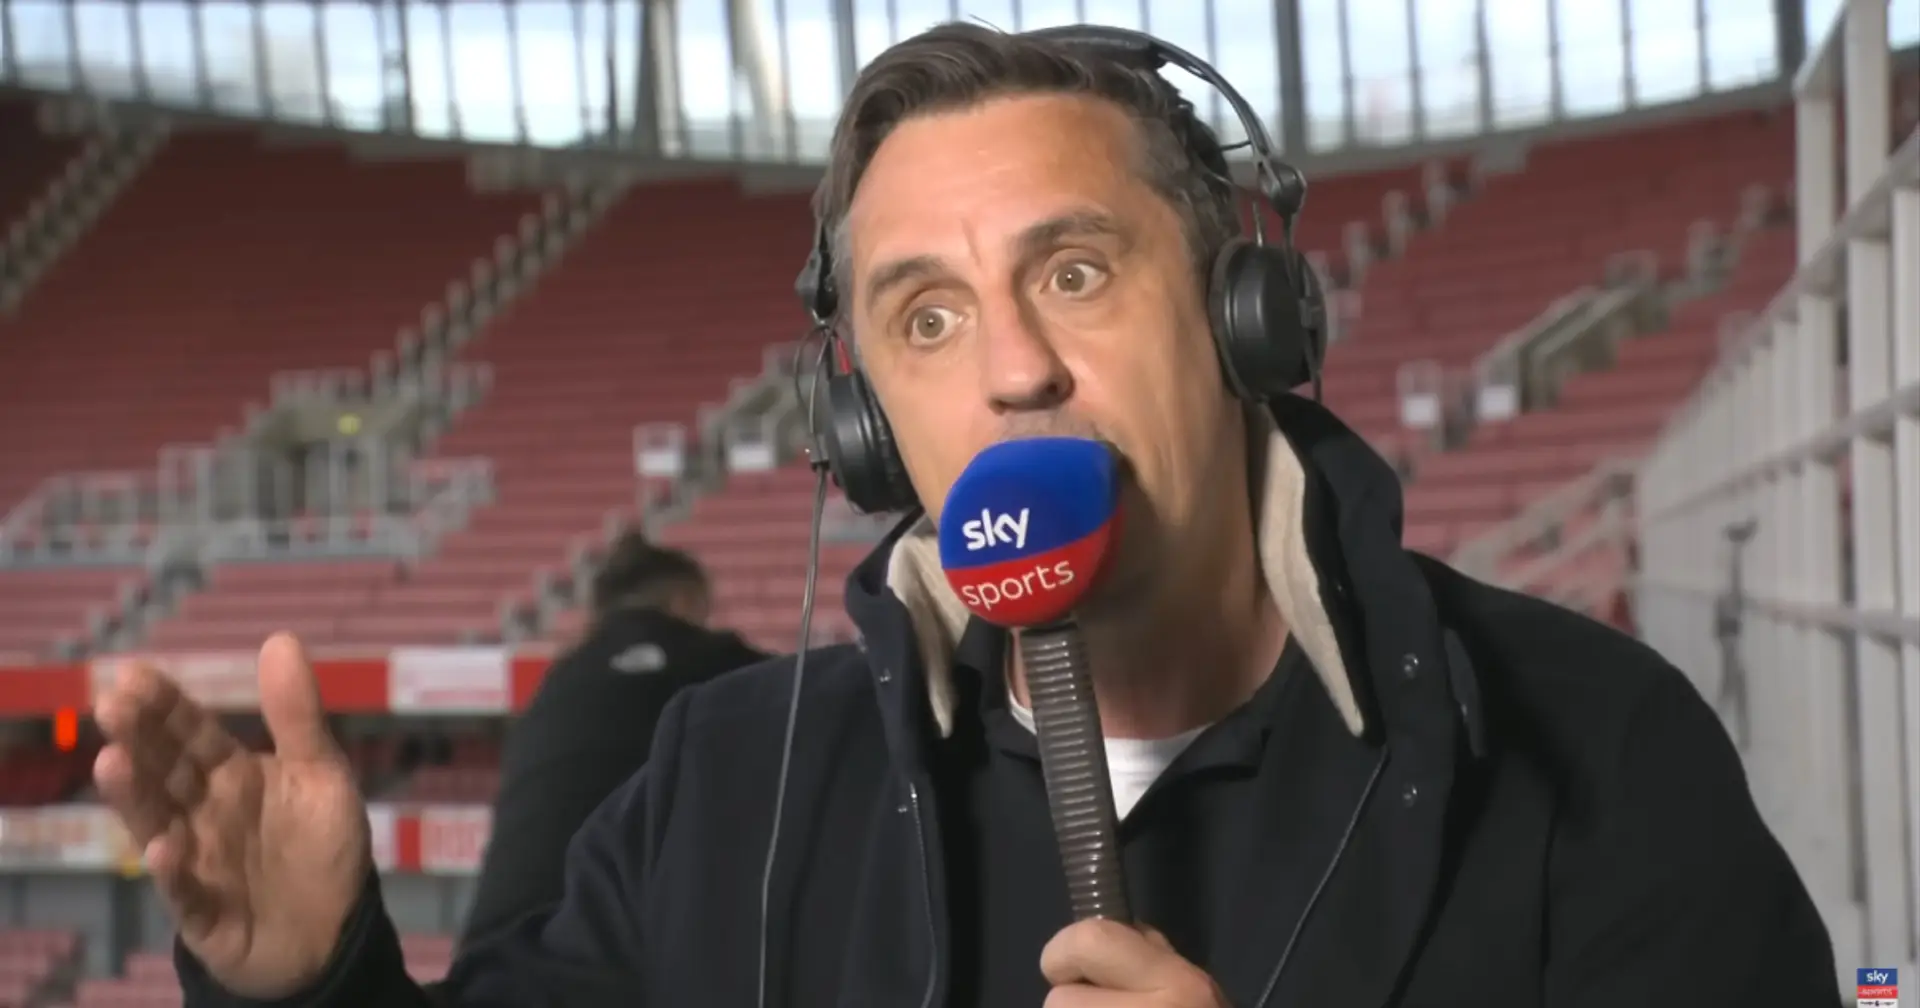 'There's no excuses for the performances': Gary Neville slams talk of injury issues at Man United